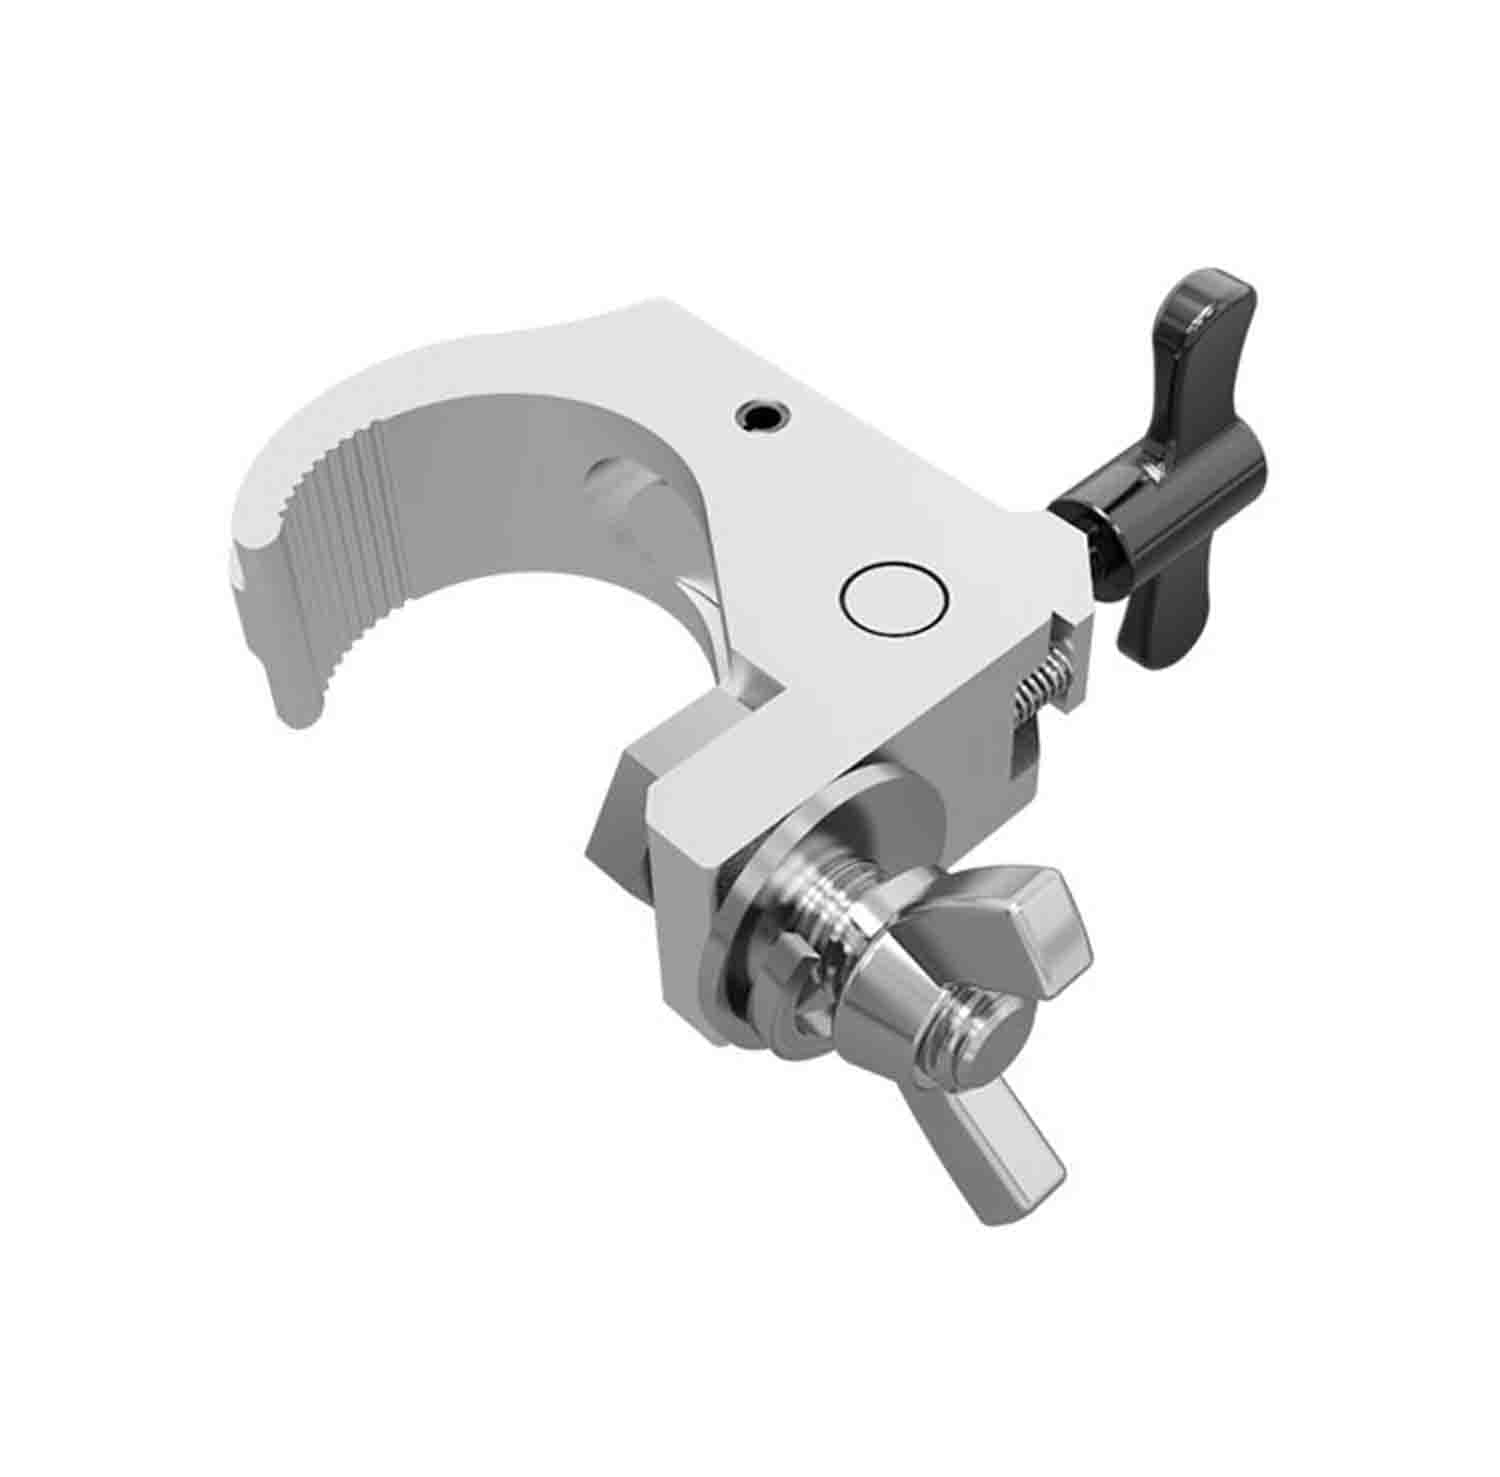 Global Truss JR SNAP CLAMP, Light Duty Low Profile Hook Style Clamp - Hollywood DJ